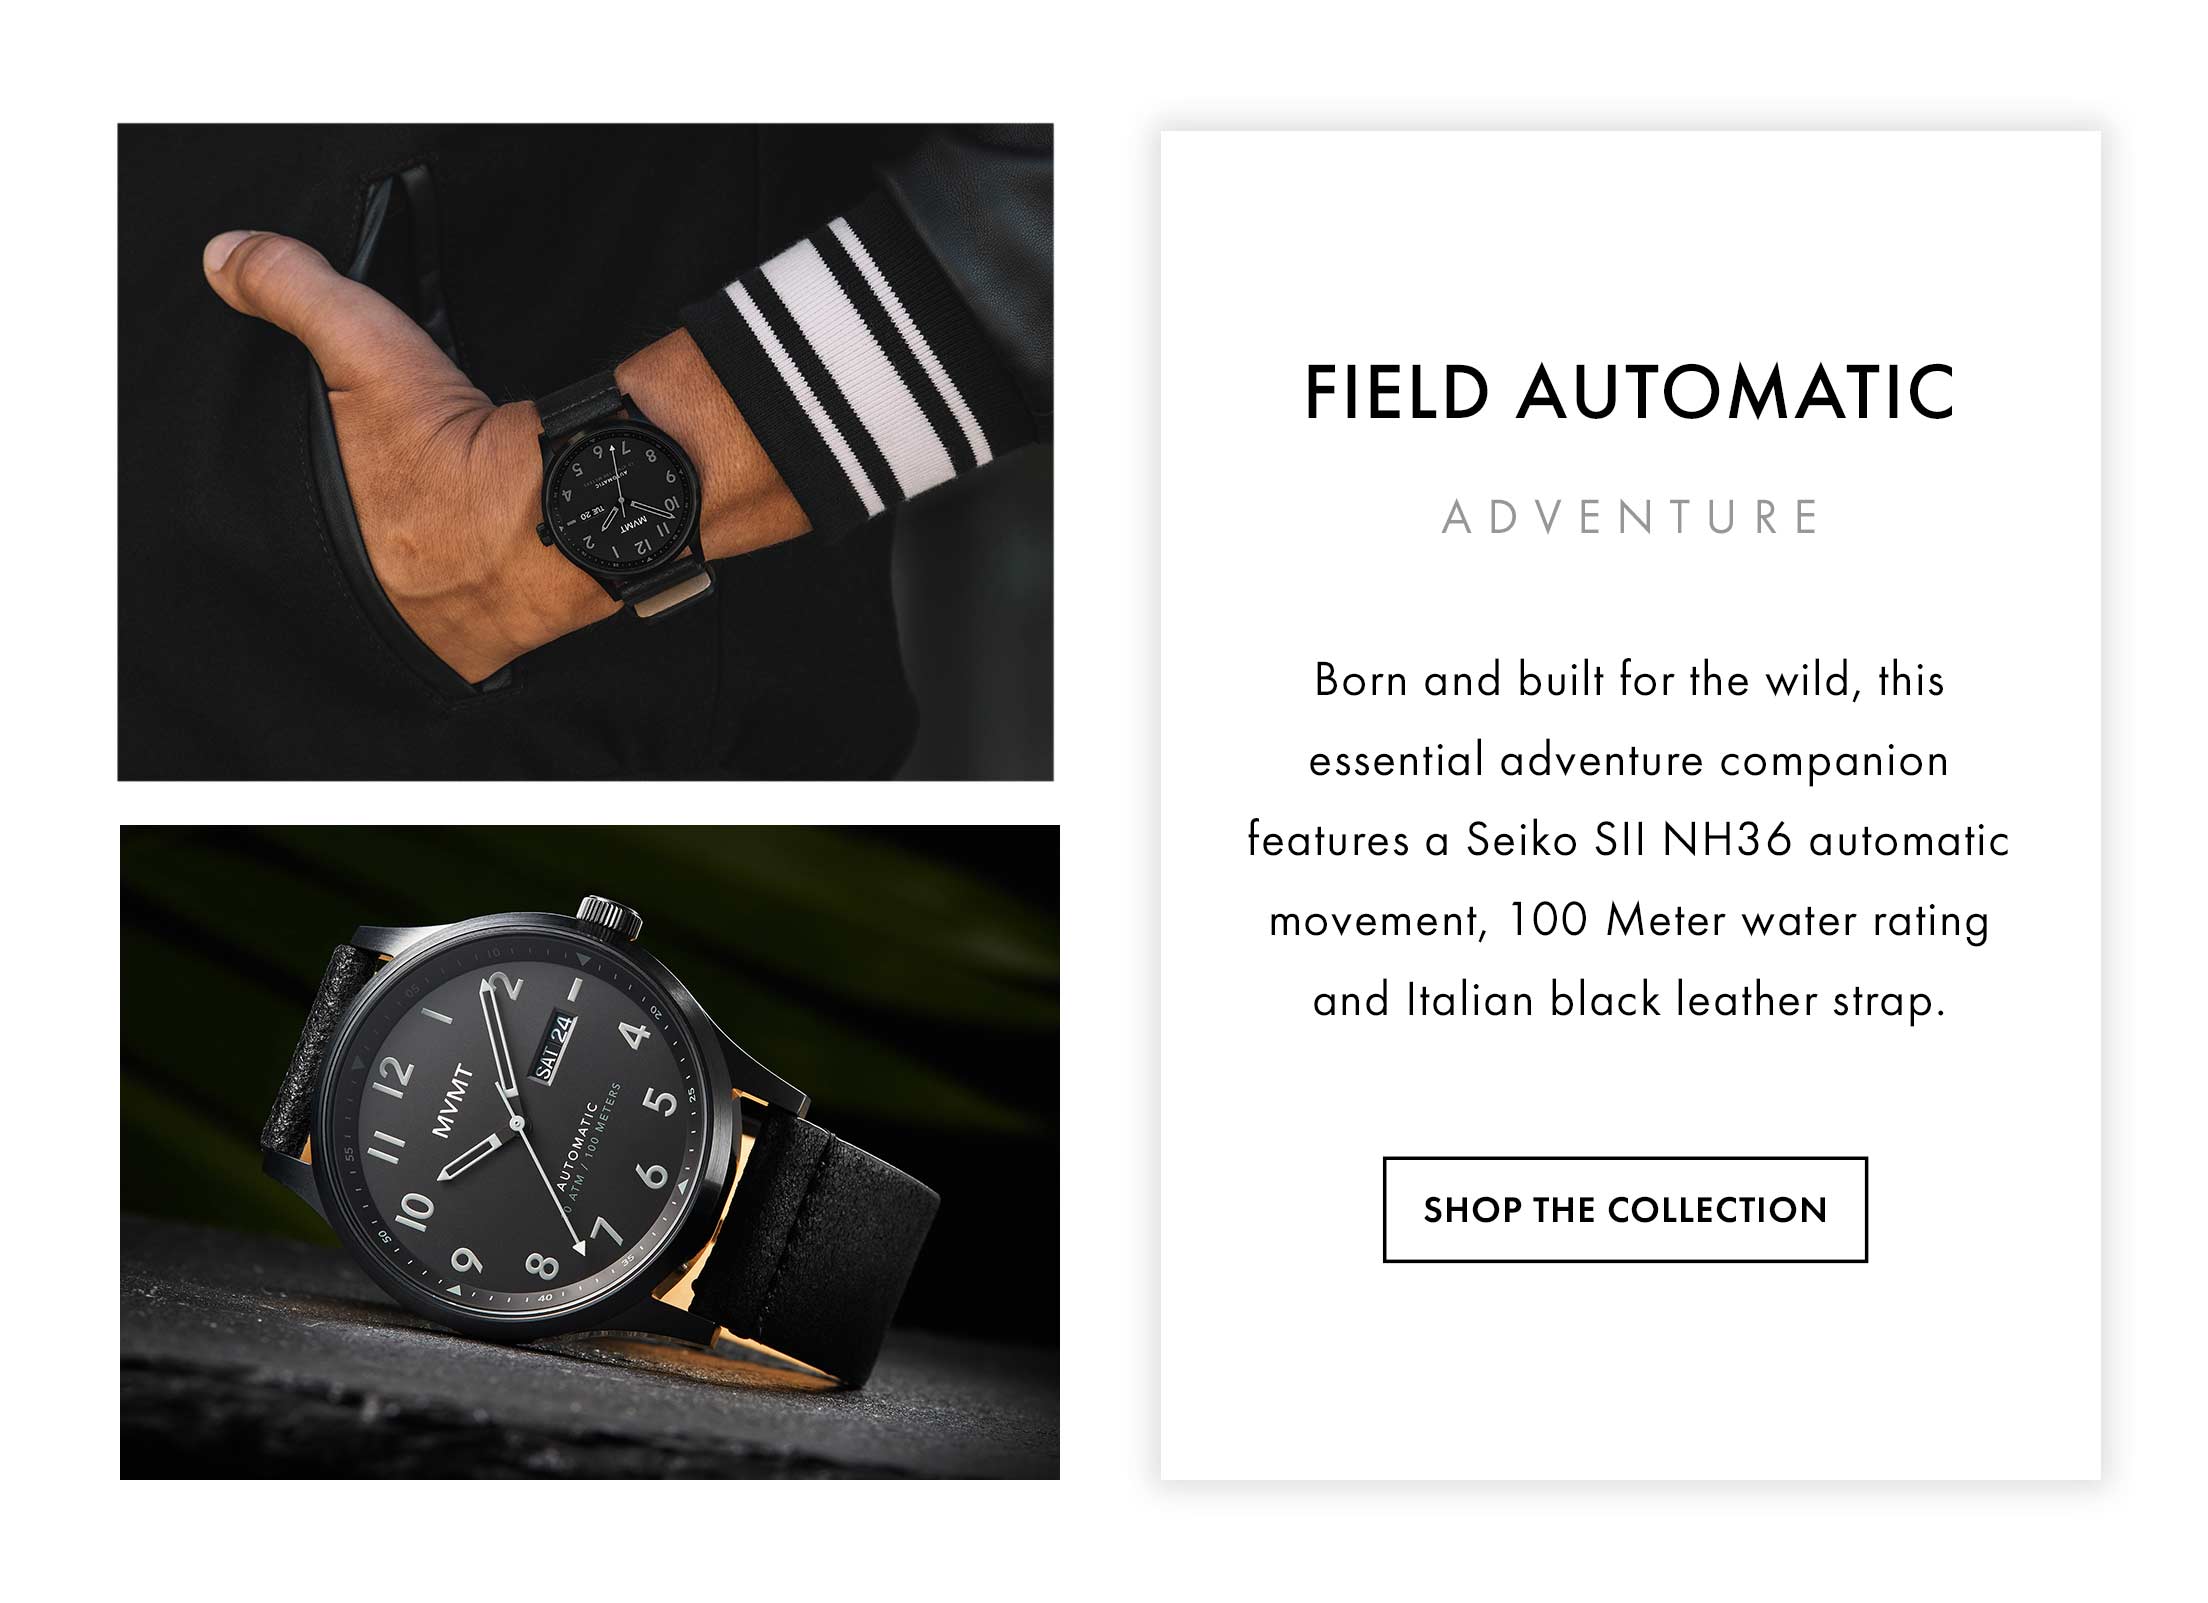 Field Automatic Adventure Born and built for the wild, this essential adventure companion features a Seiko SII NH36 automatic movement, 100 Meter water rating and black Italian leather strap. Shop the Collection